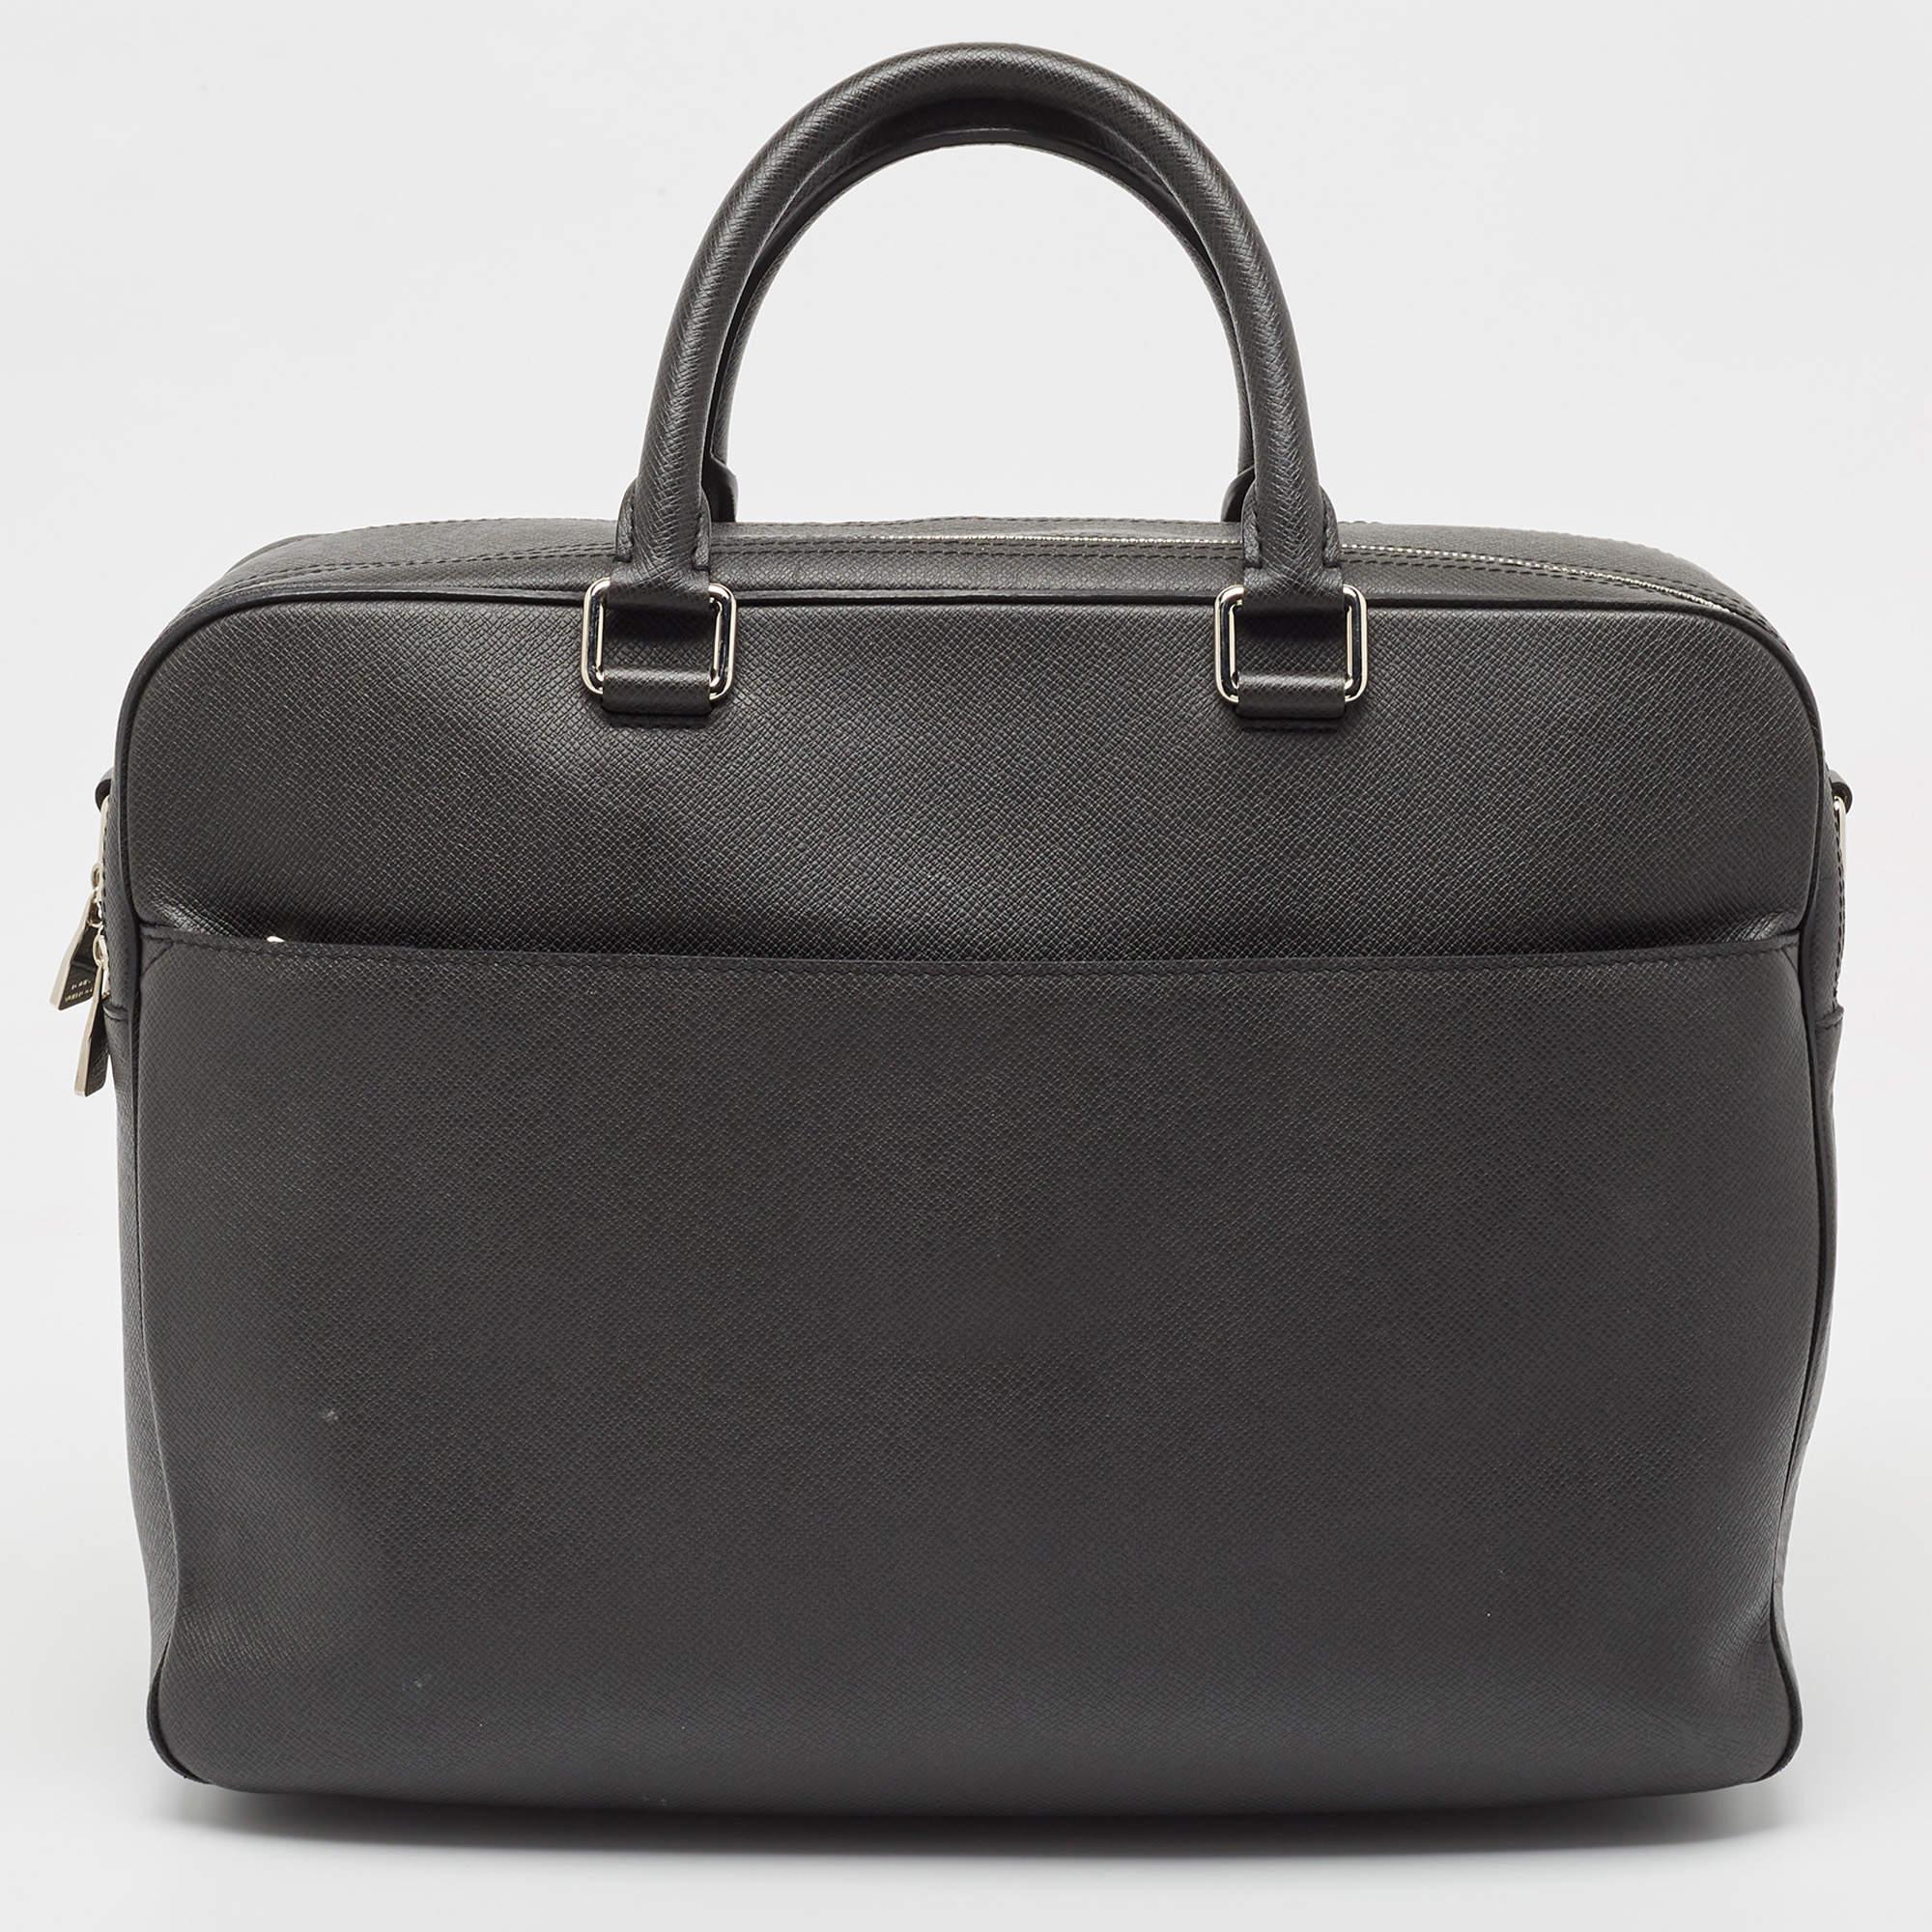 Indulge in luxury with this LV briefcase for men. Meticulously crafted from premium materials, it combines exquisite design, impeccable craftsmanship, and timeless elegance. Elevate your style with this fashion accessory.

Includes: Detachable